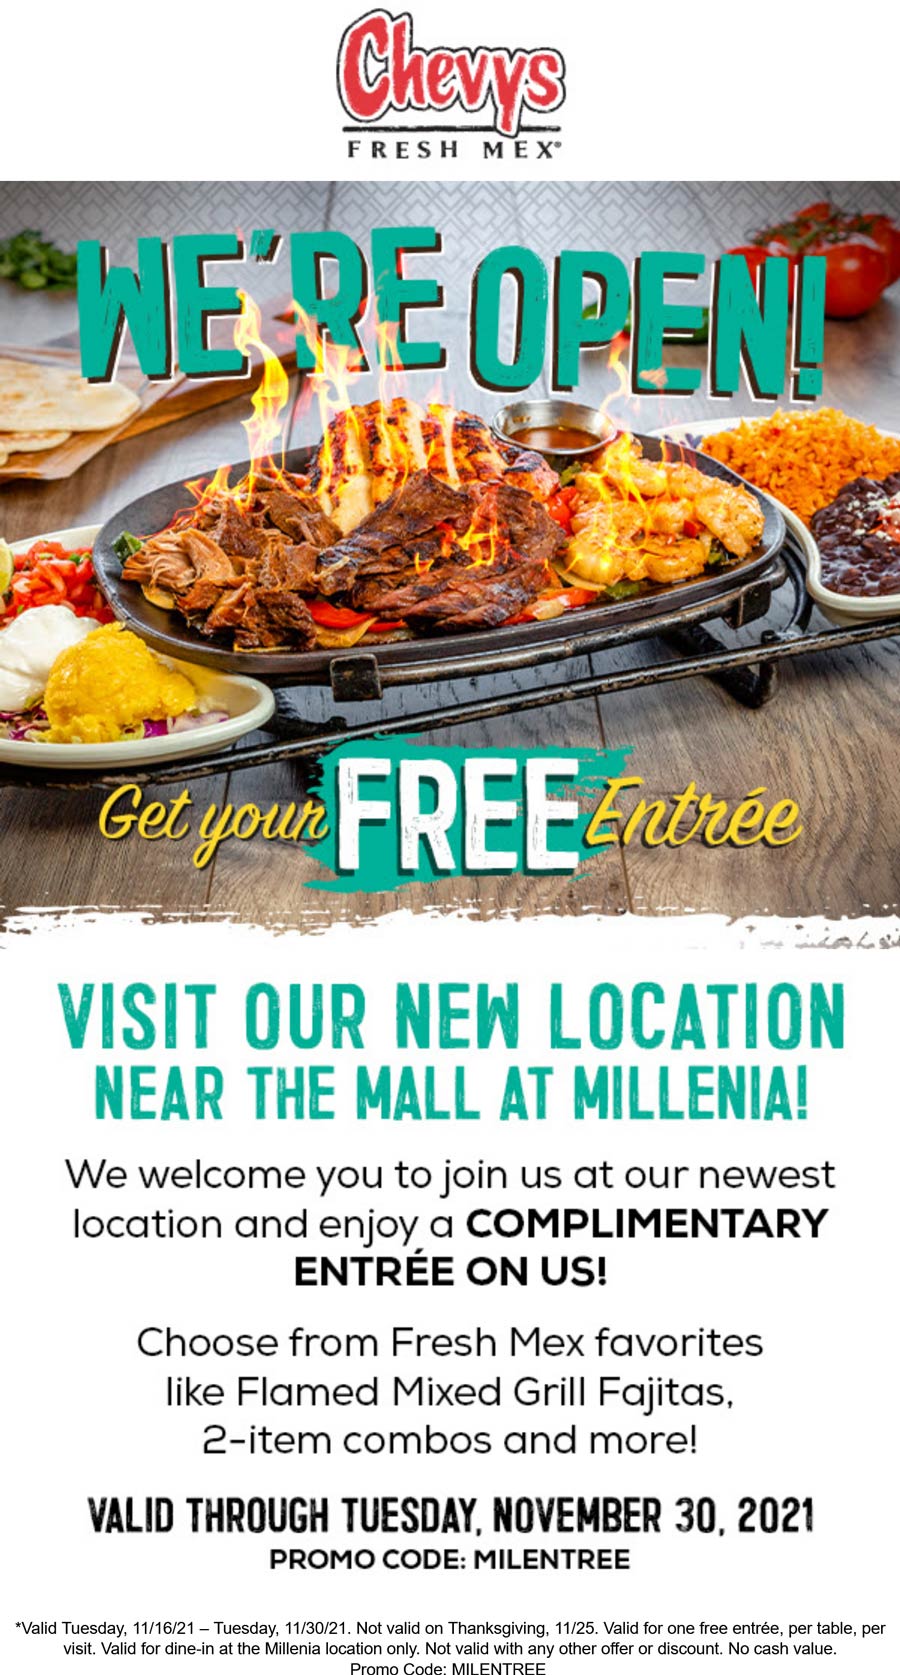 Chevys restaurants Coupon  Free entree all month at Mall at Millenia opening of Chevys Fresh Mex #chevys 